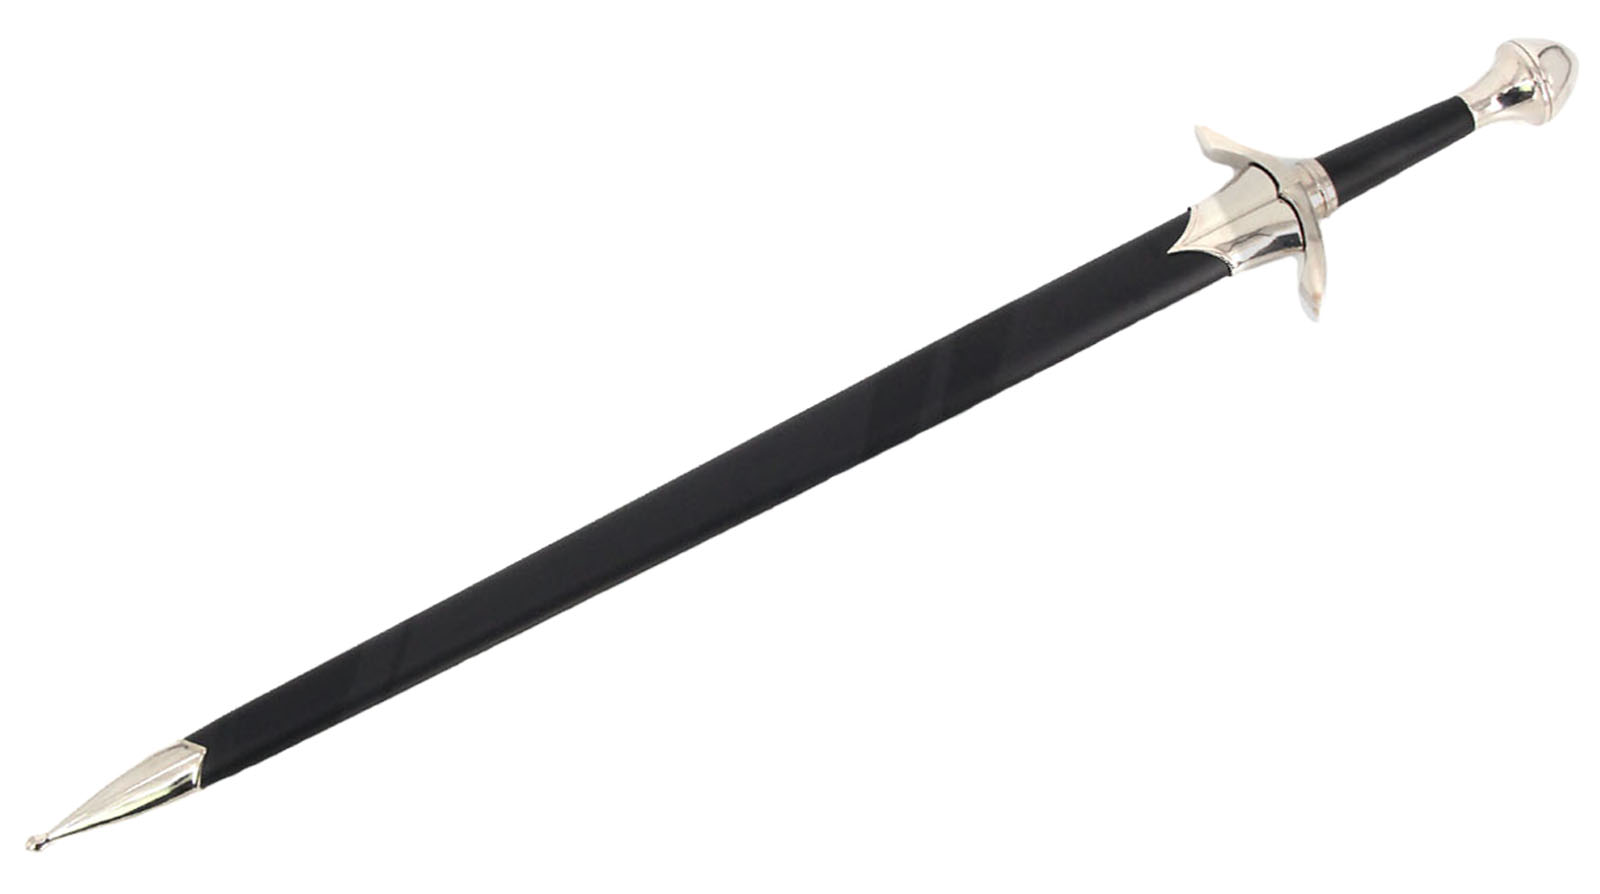 Knight's sword with scabbard